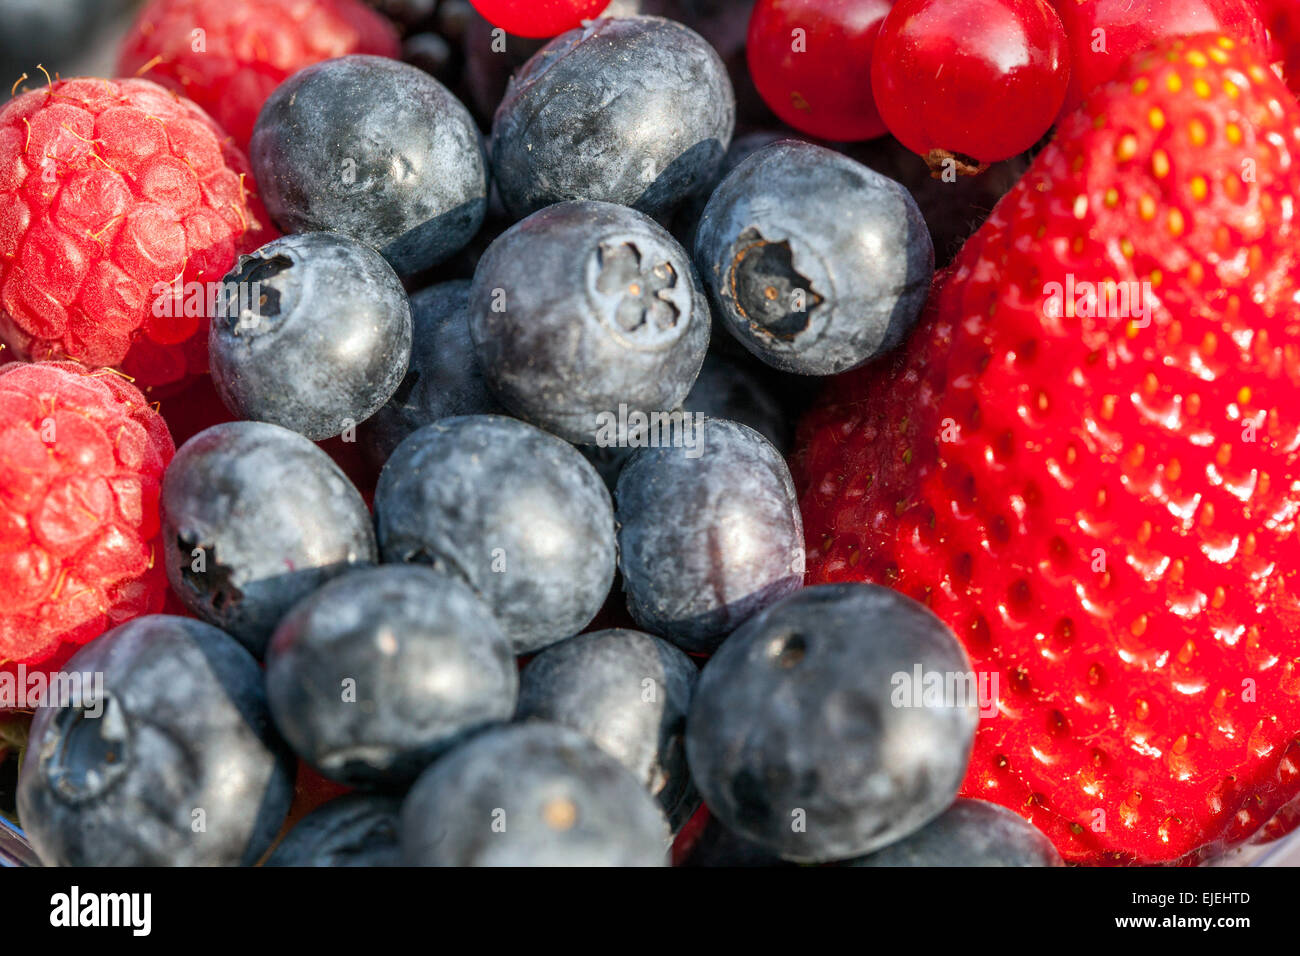 Strawberries, Blueberries close up texture luscious fruits Stock Photo